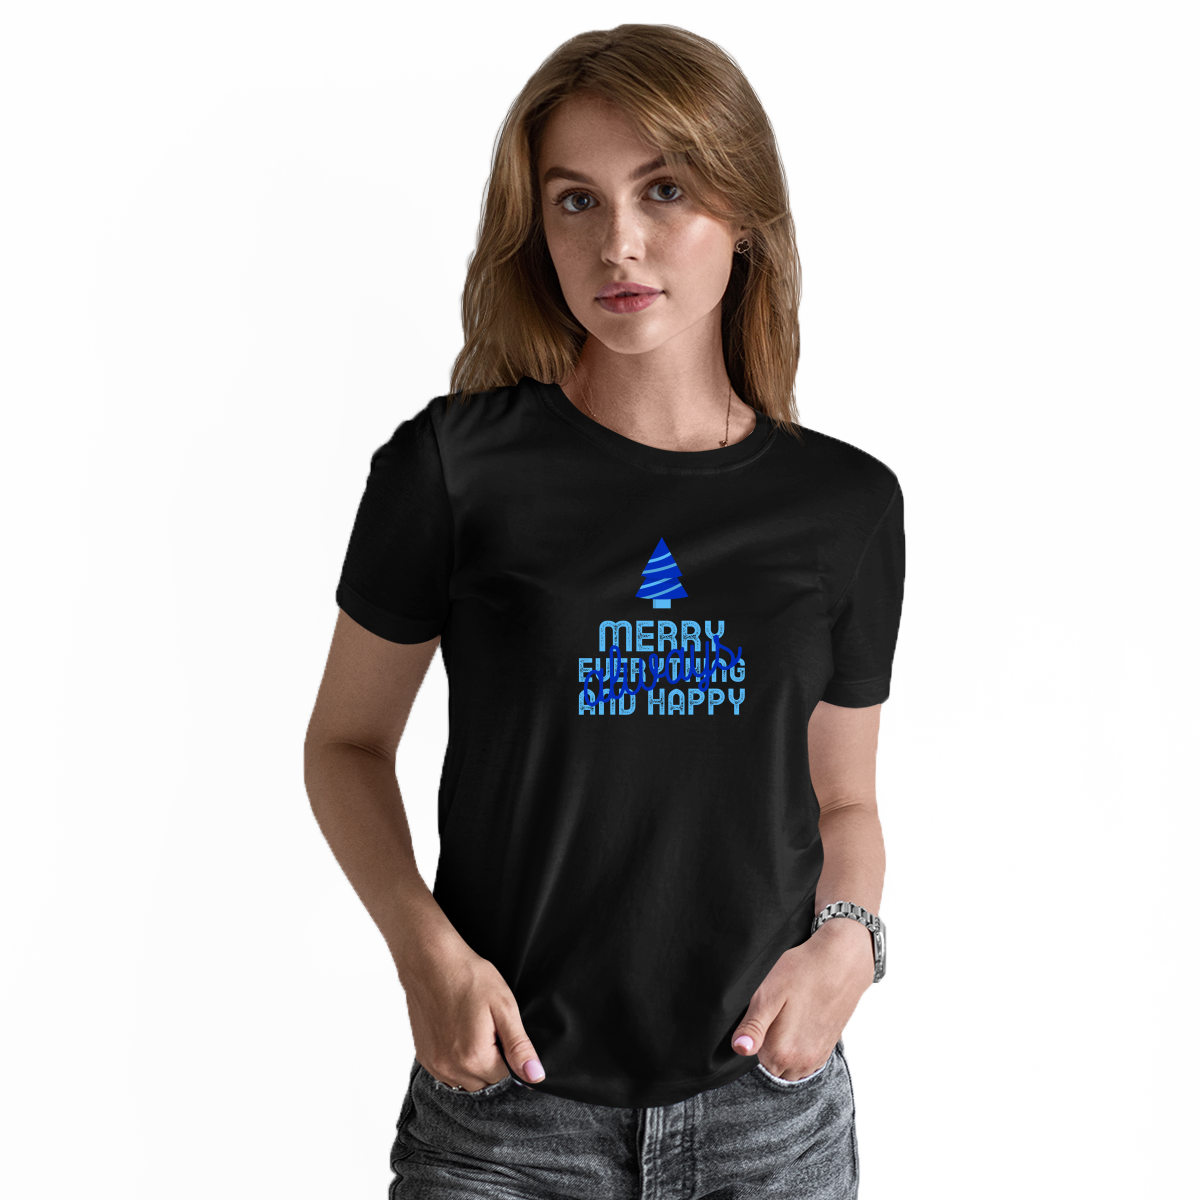 Always Merry Everything and Happy Women's T-shirt | Black